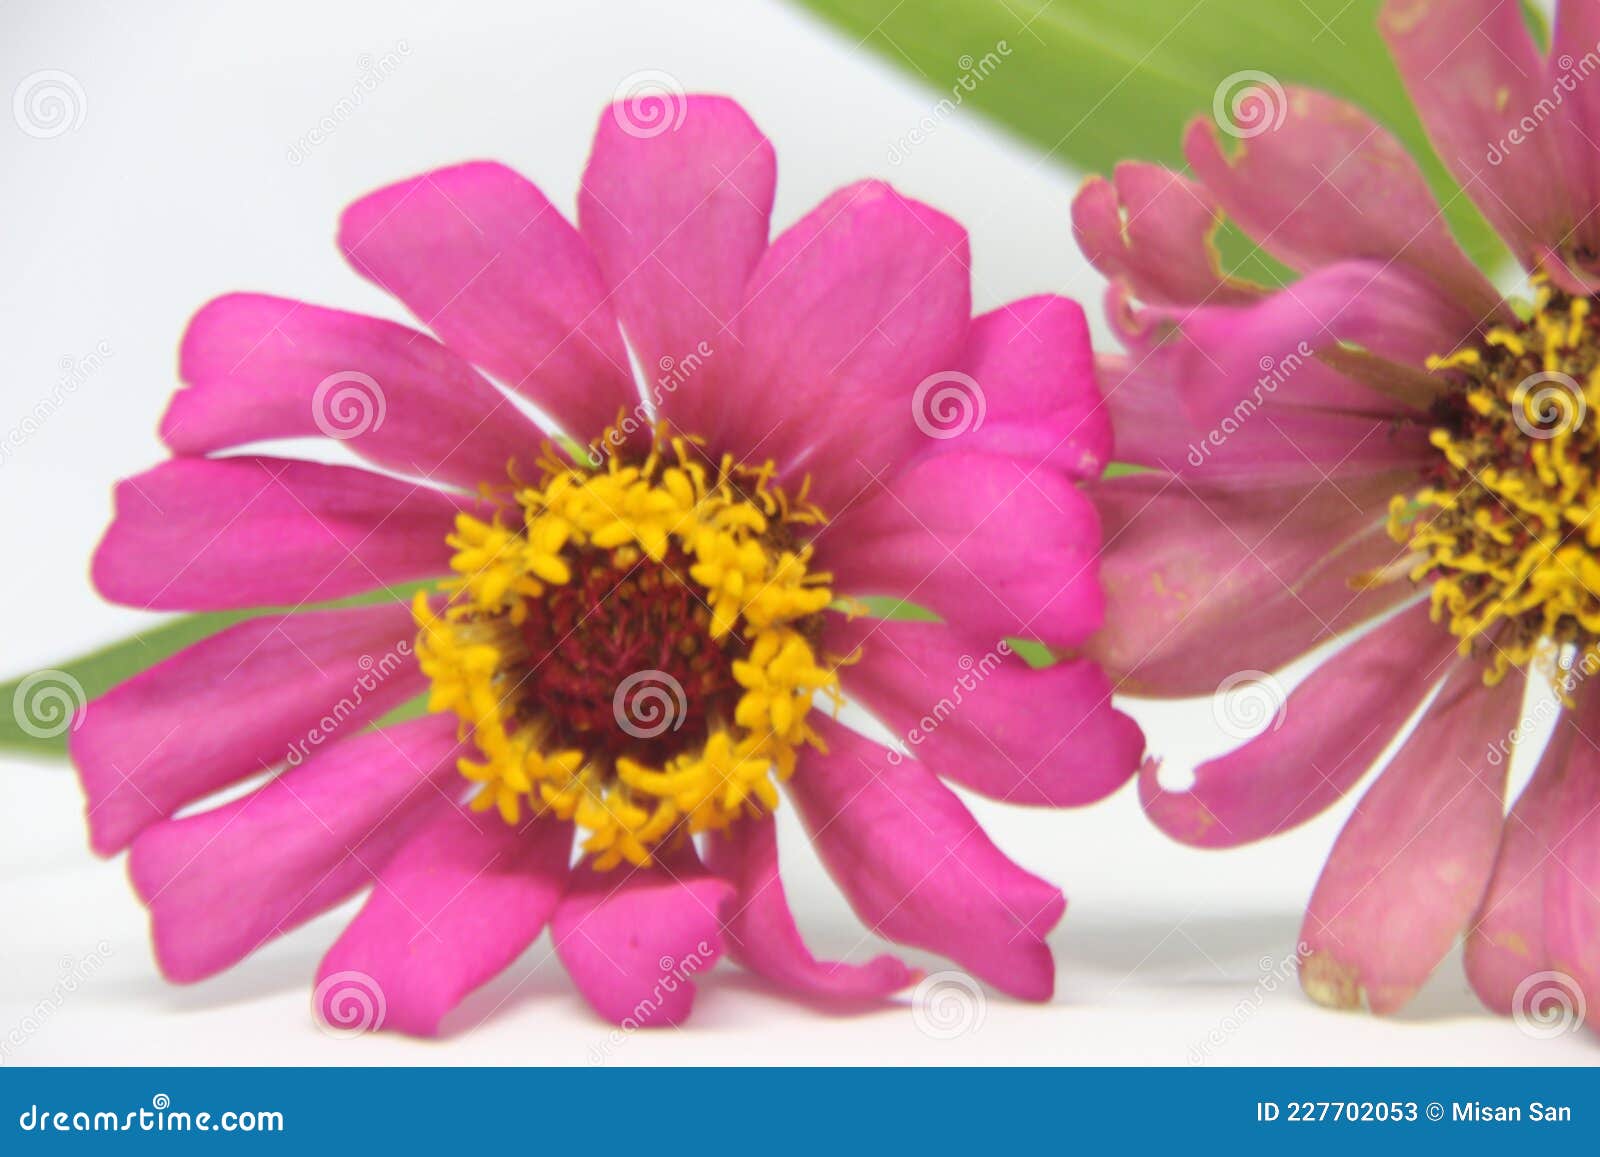 beautiful two zinnia pink flower in white background. top view, collection set of orange and violet zinnia flower blossom blooming